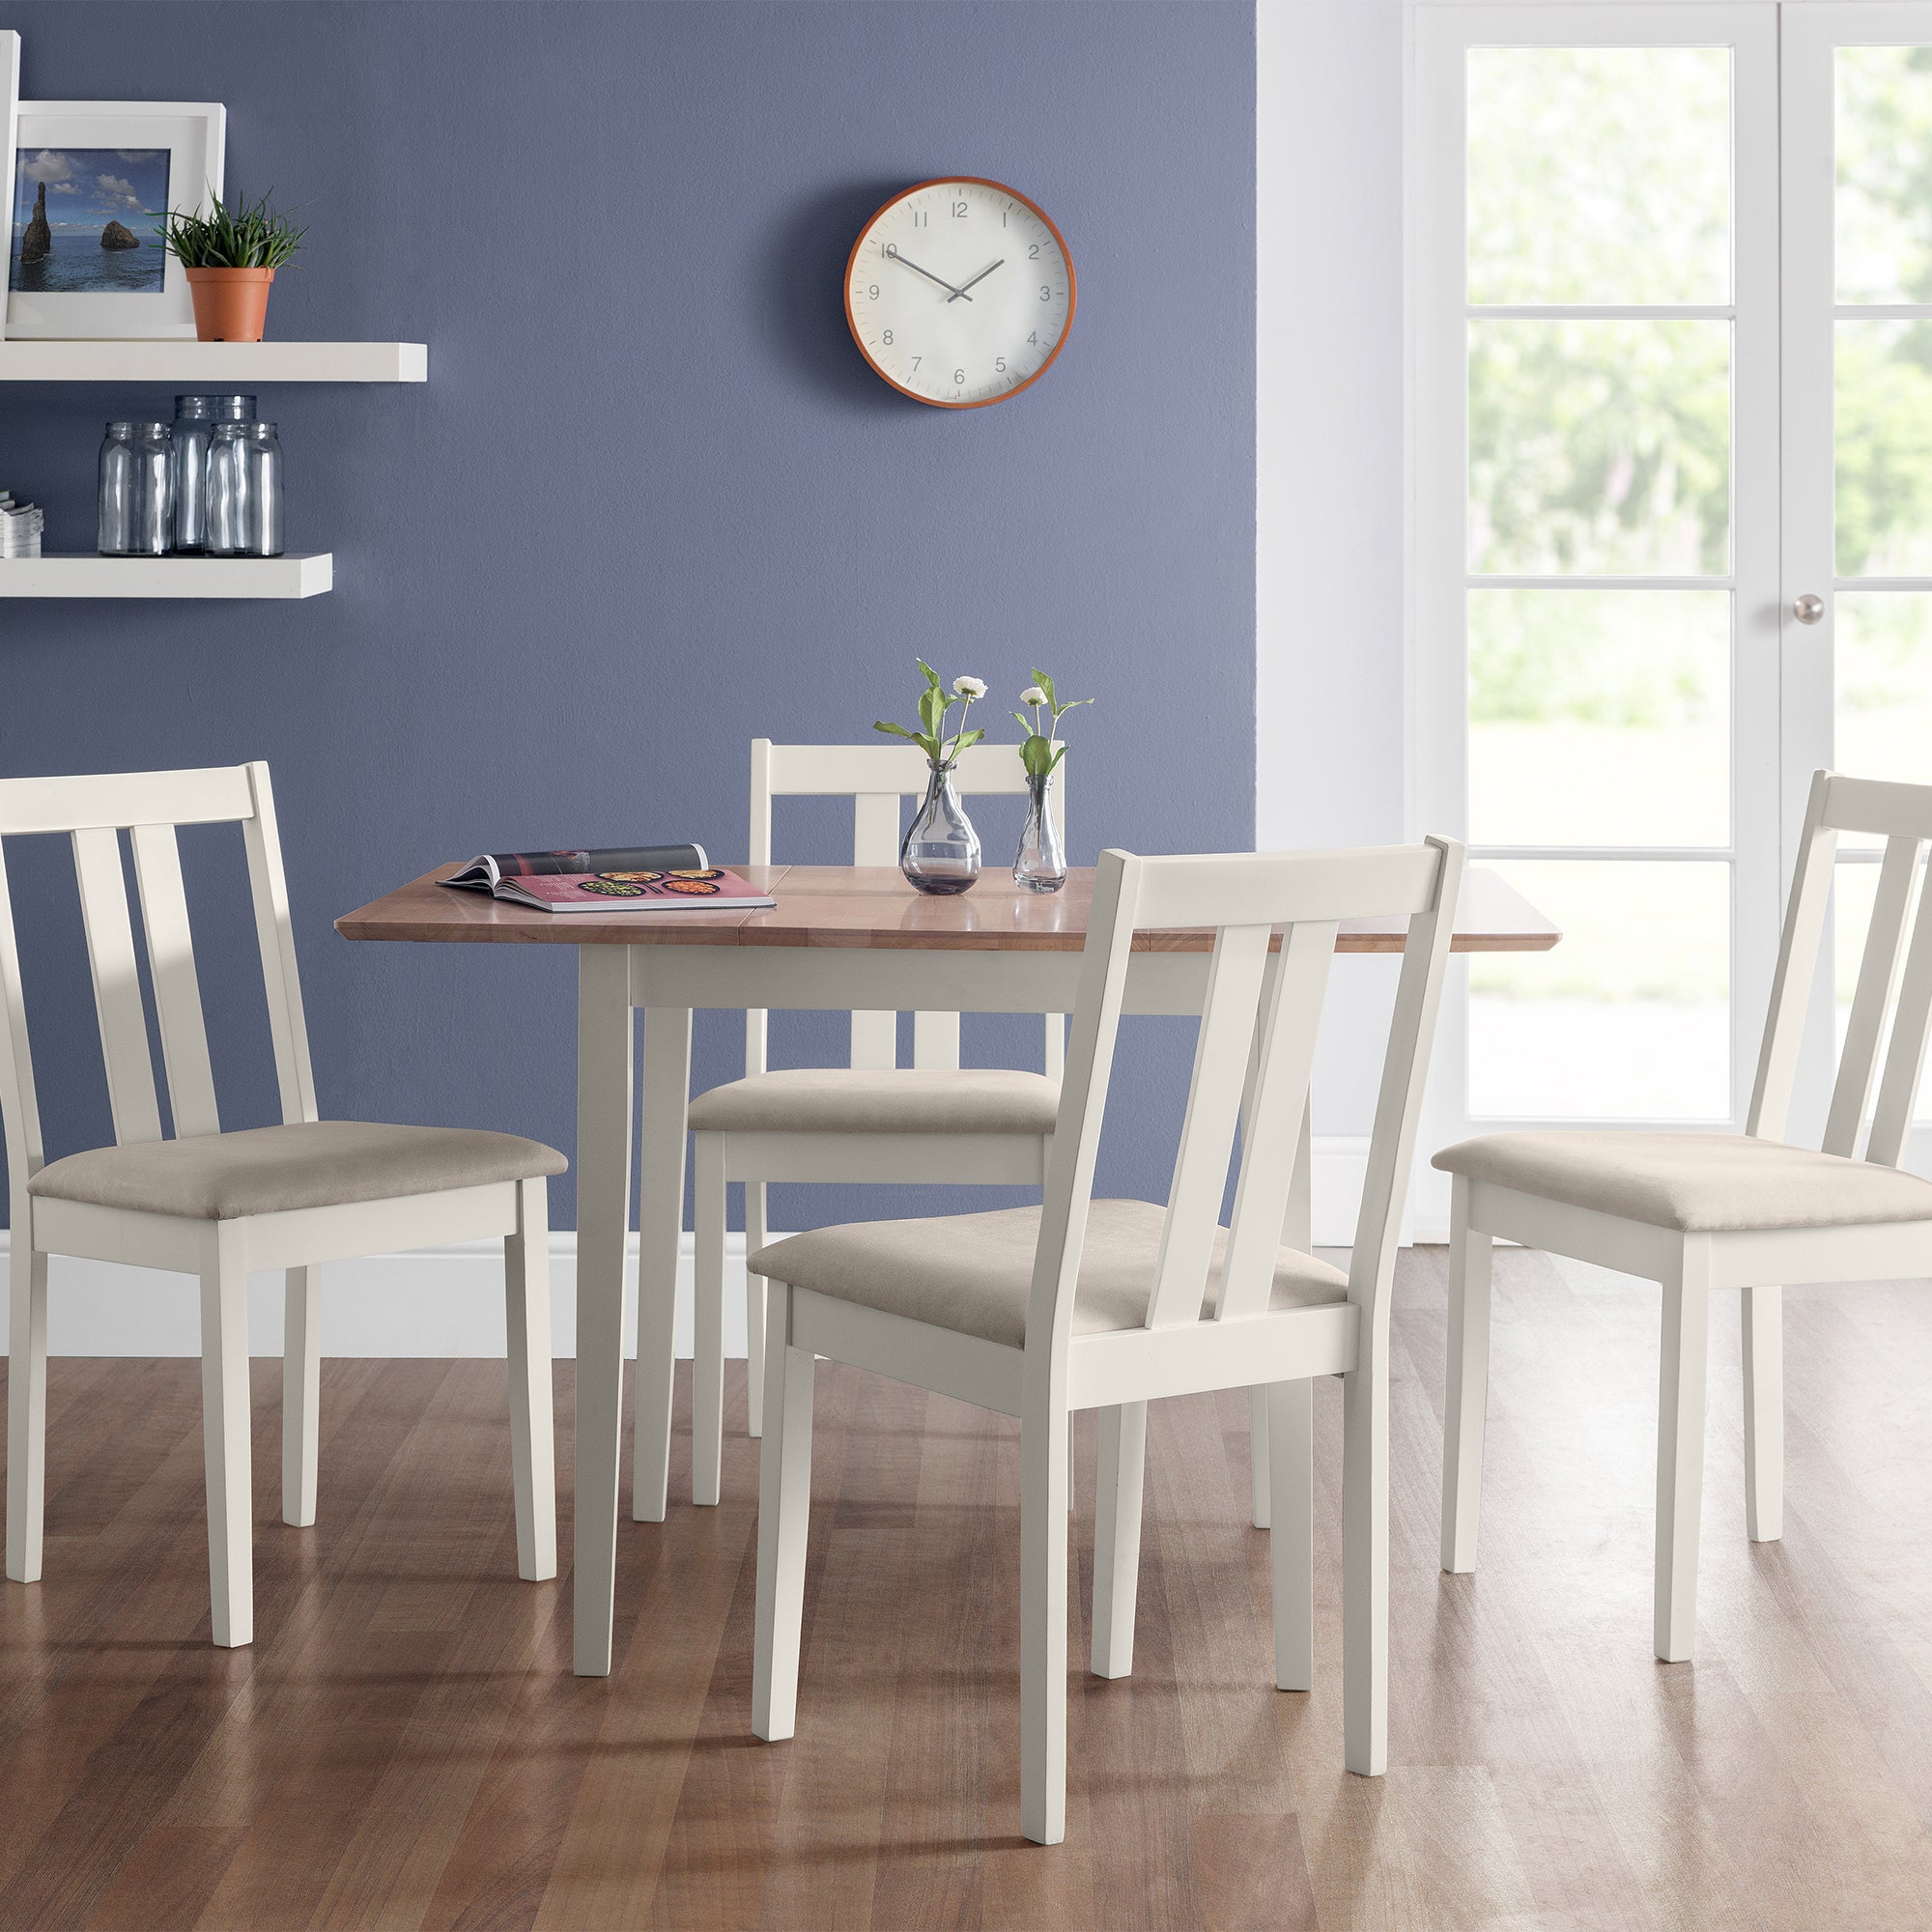 Rufford 4 Seater Two-Tone Dining Table, Ivory